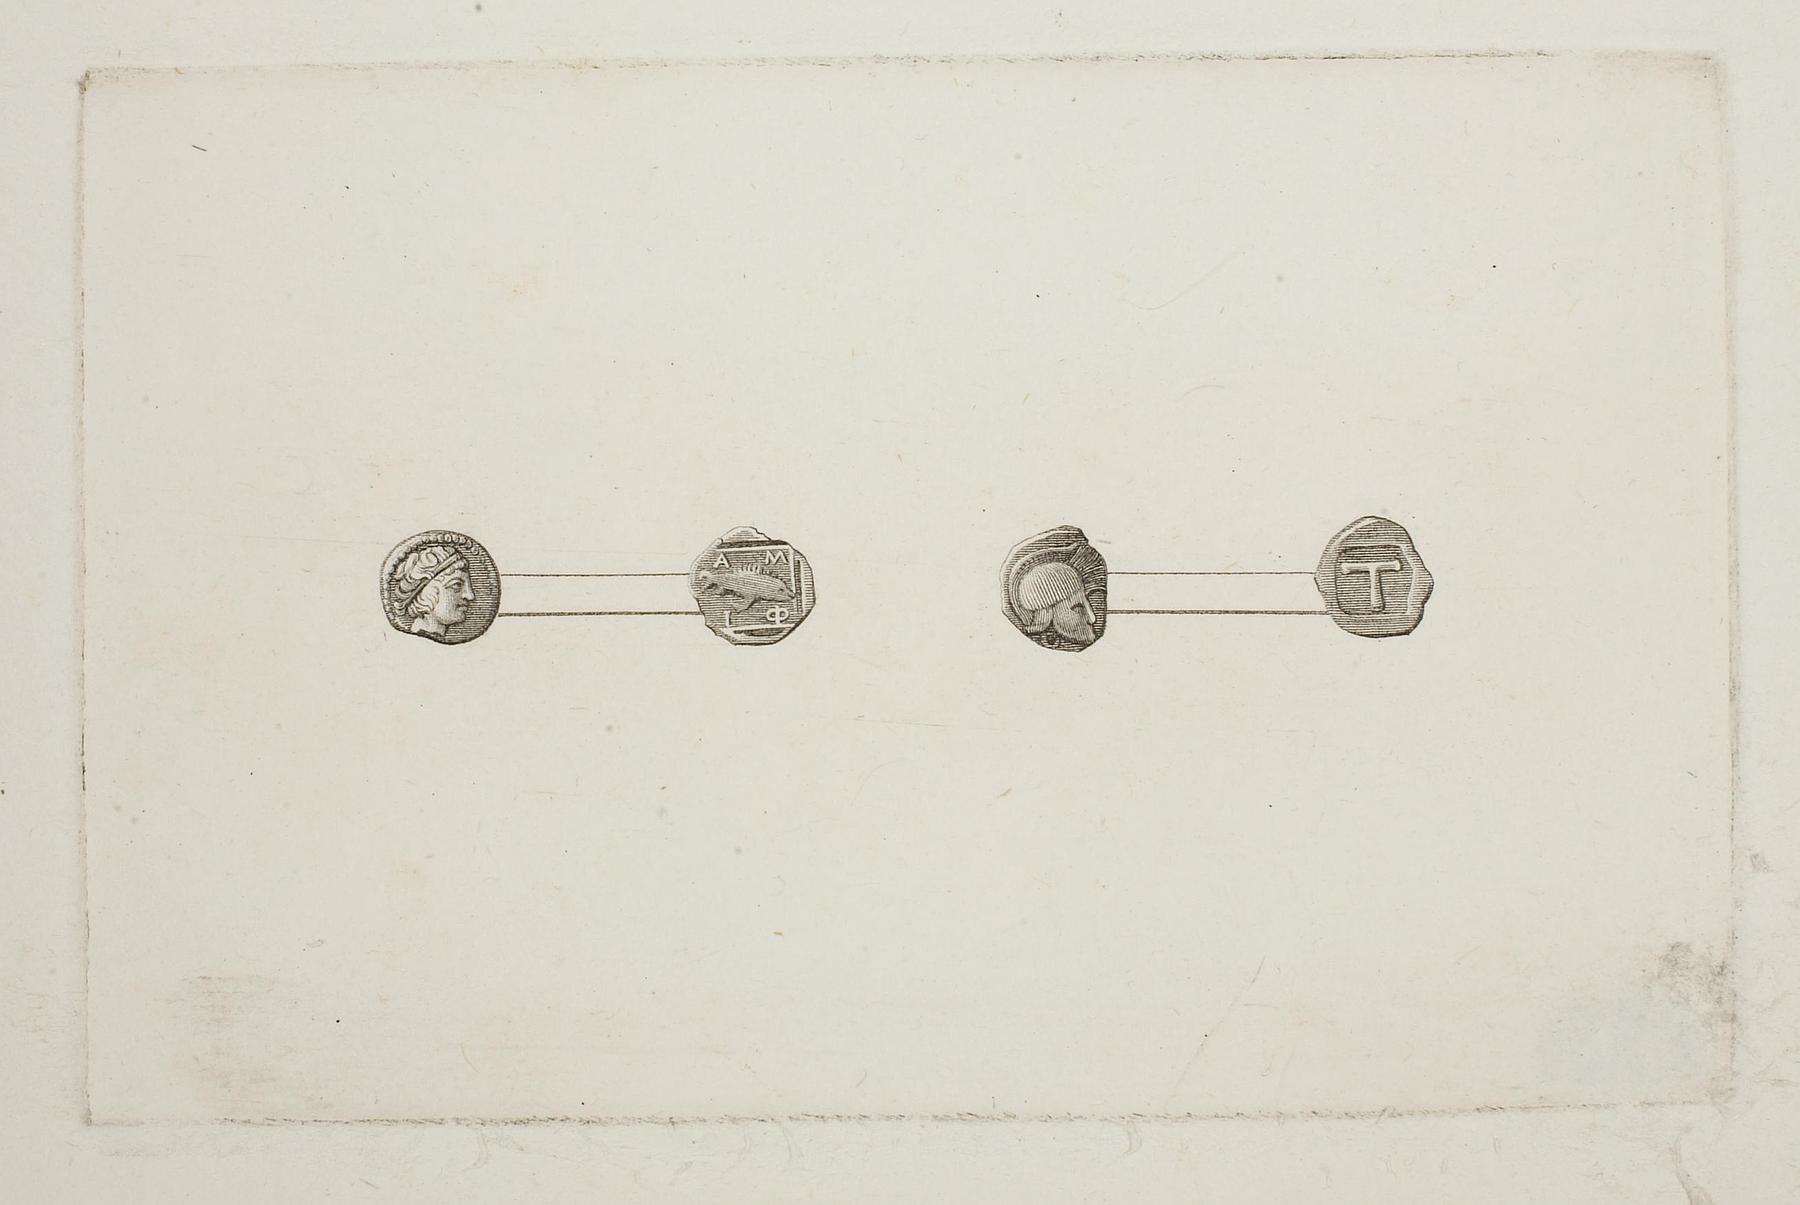 Greek coins obverse and reverse, E1578